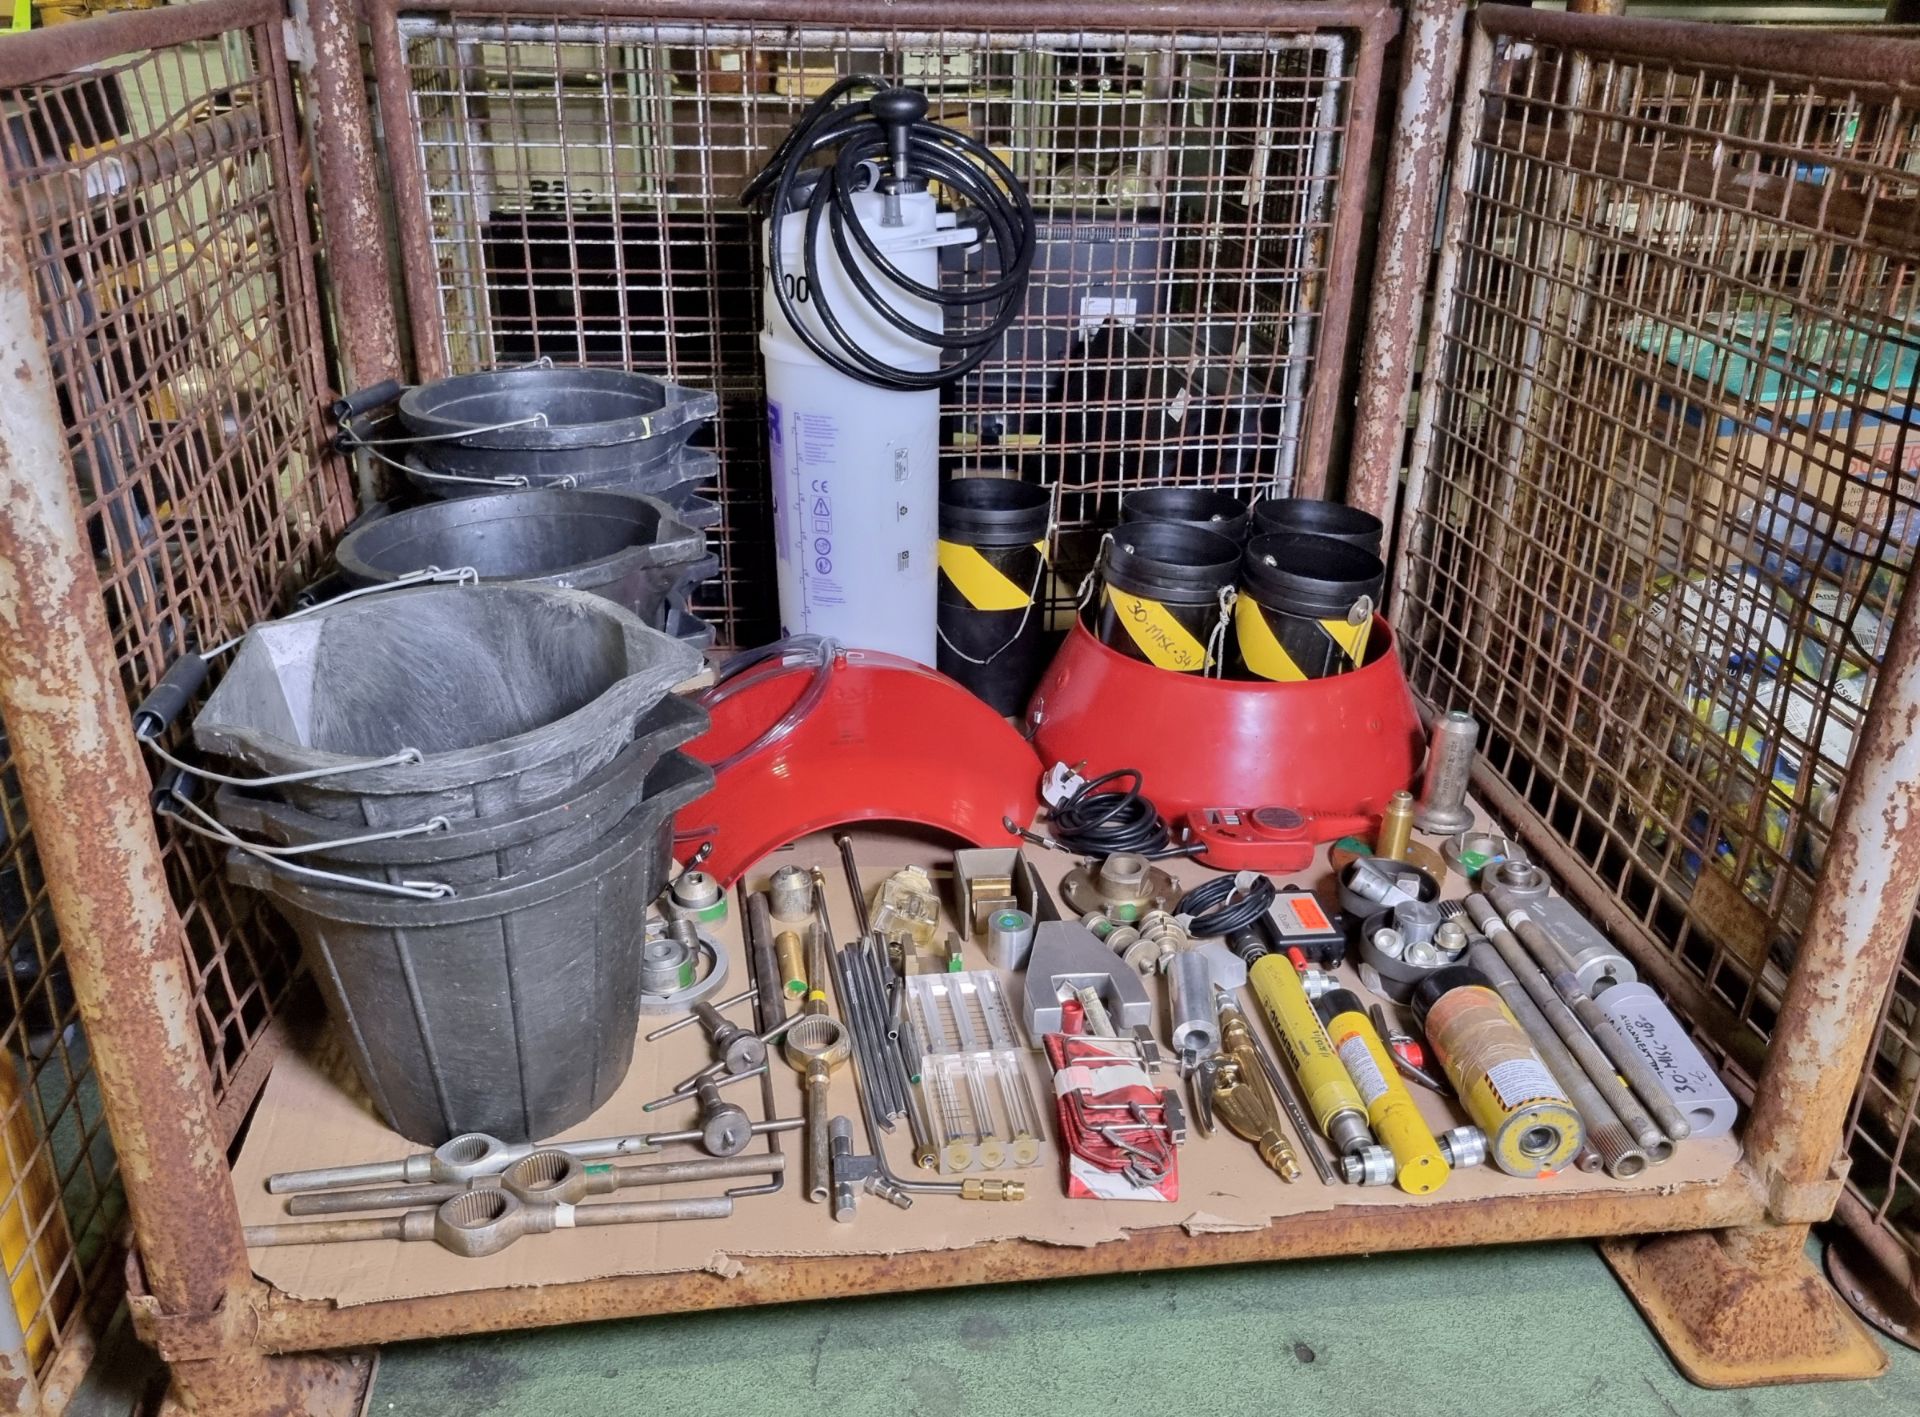 Workshop tools and equipment - alignment tools, utility buckets, pressure tank, engraver kit